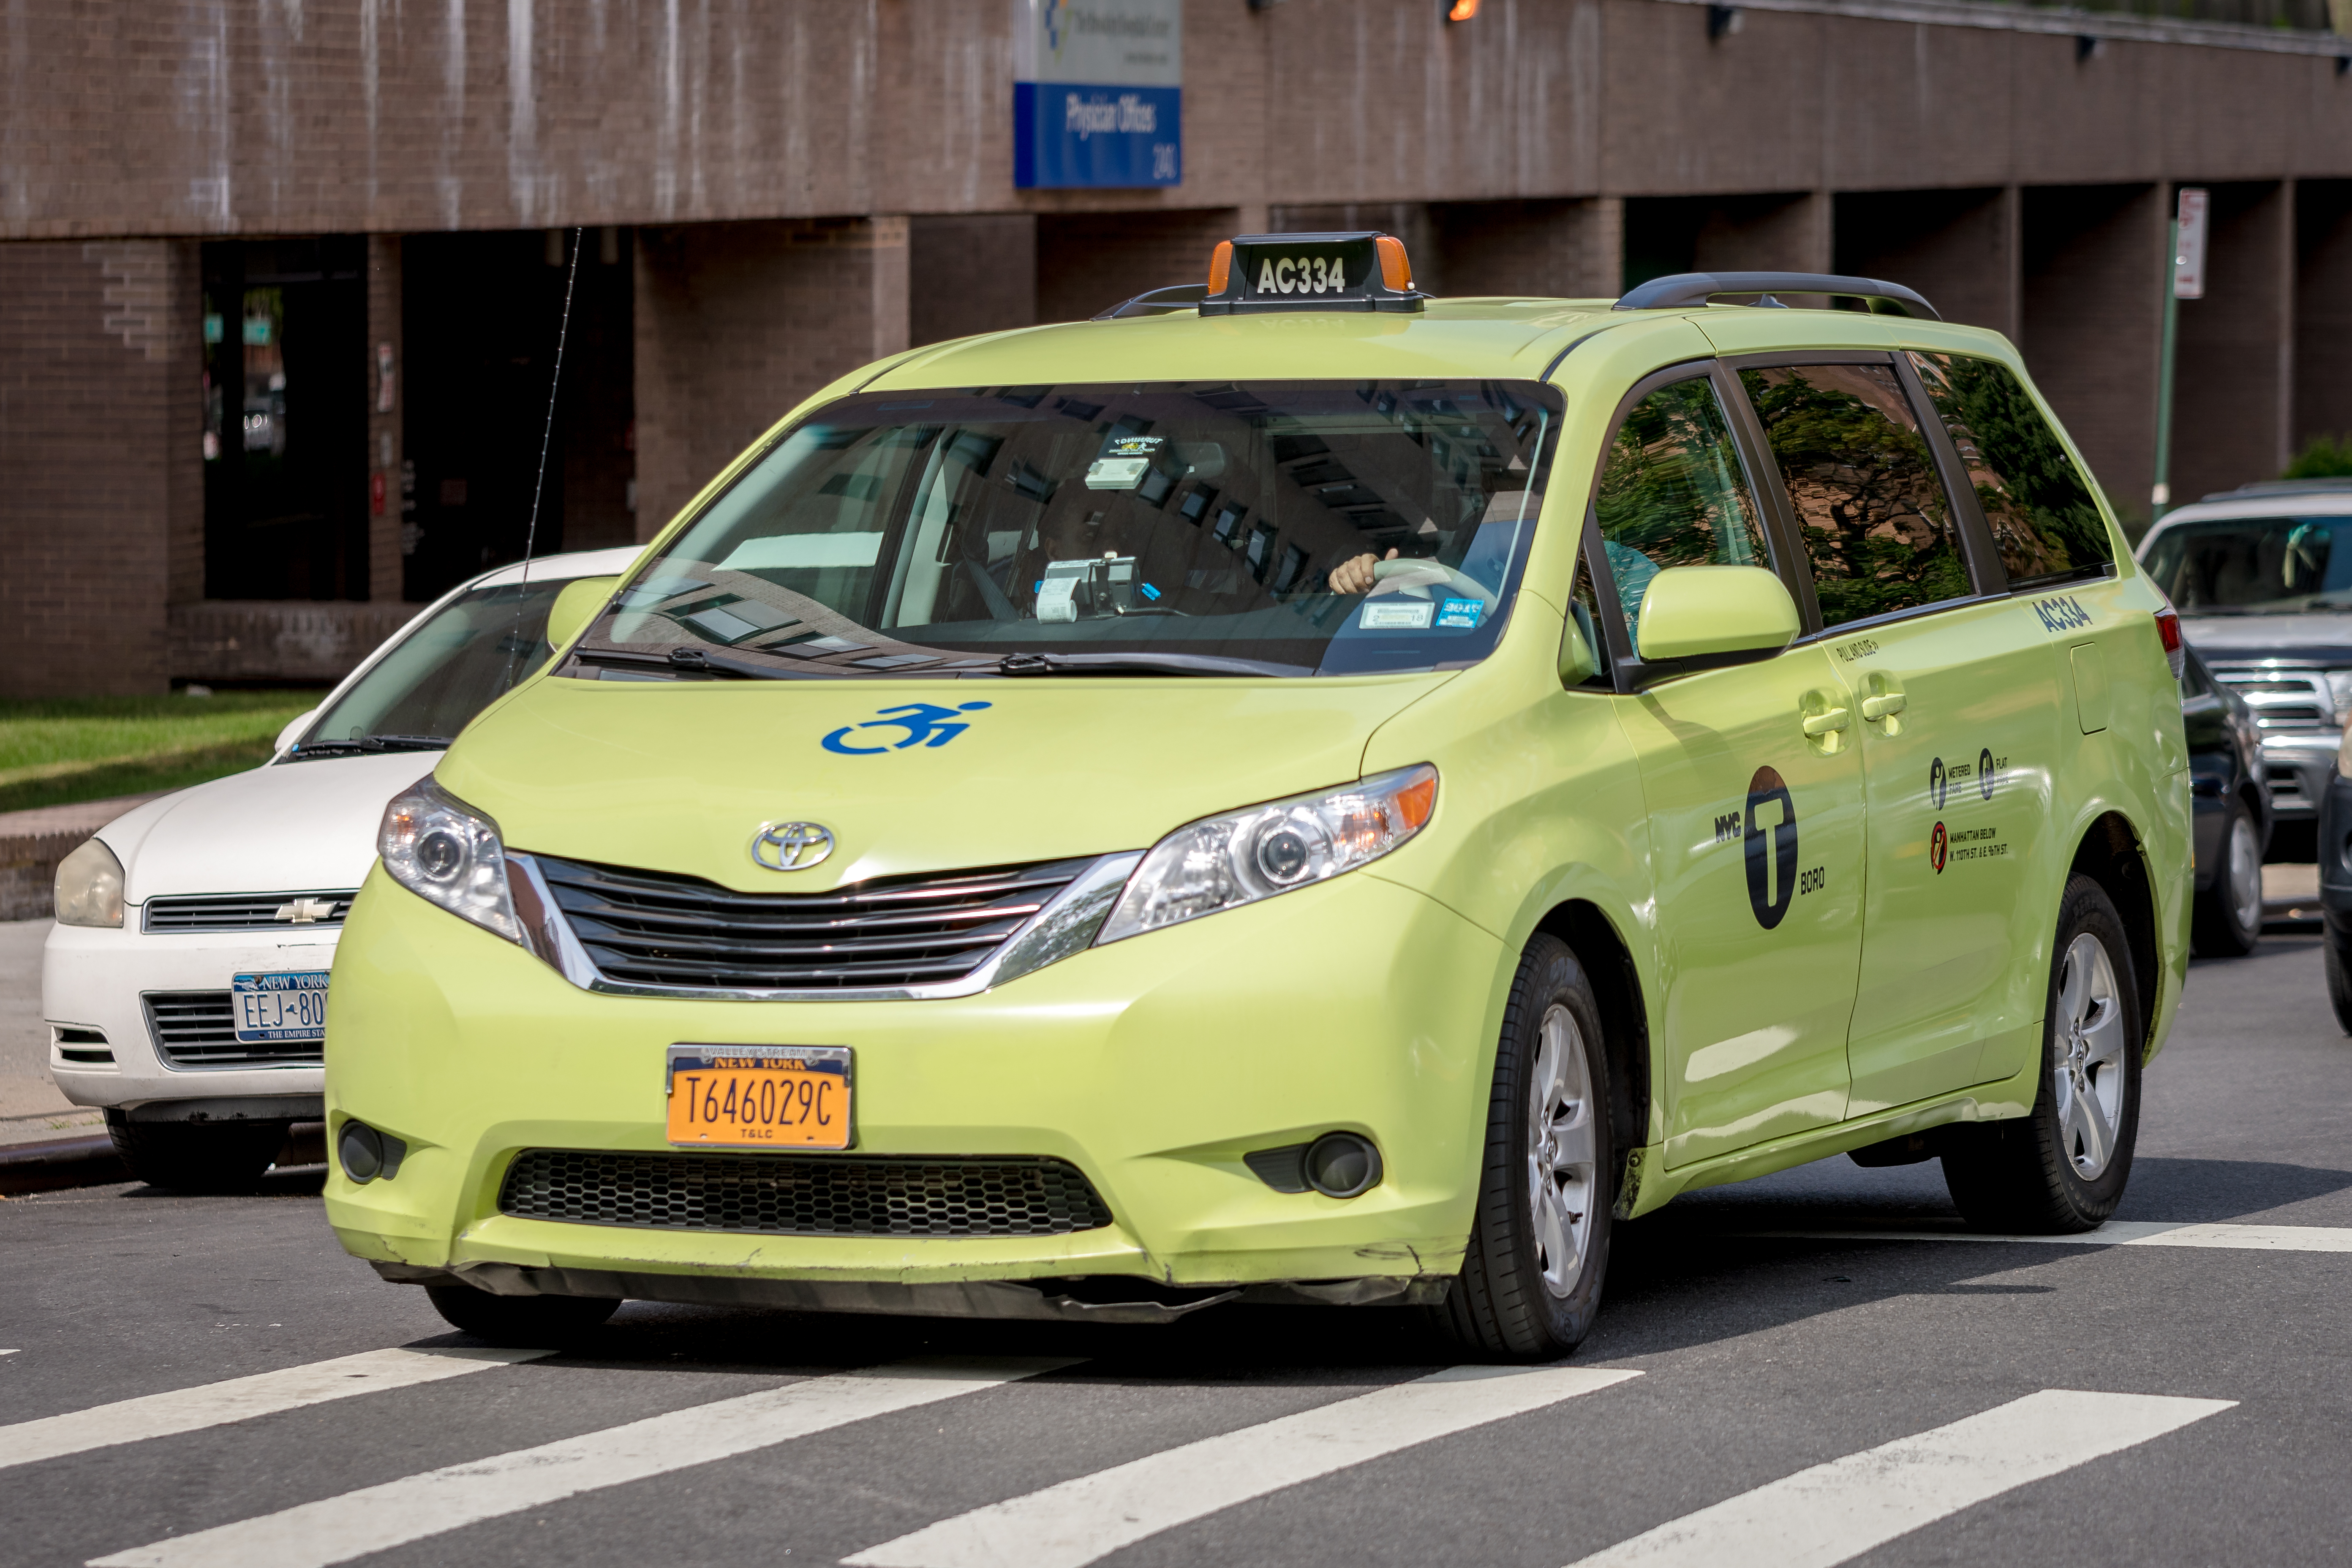 A green wheelchair accessible Toyota Sienna travels down a New York City street.